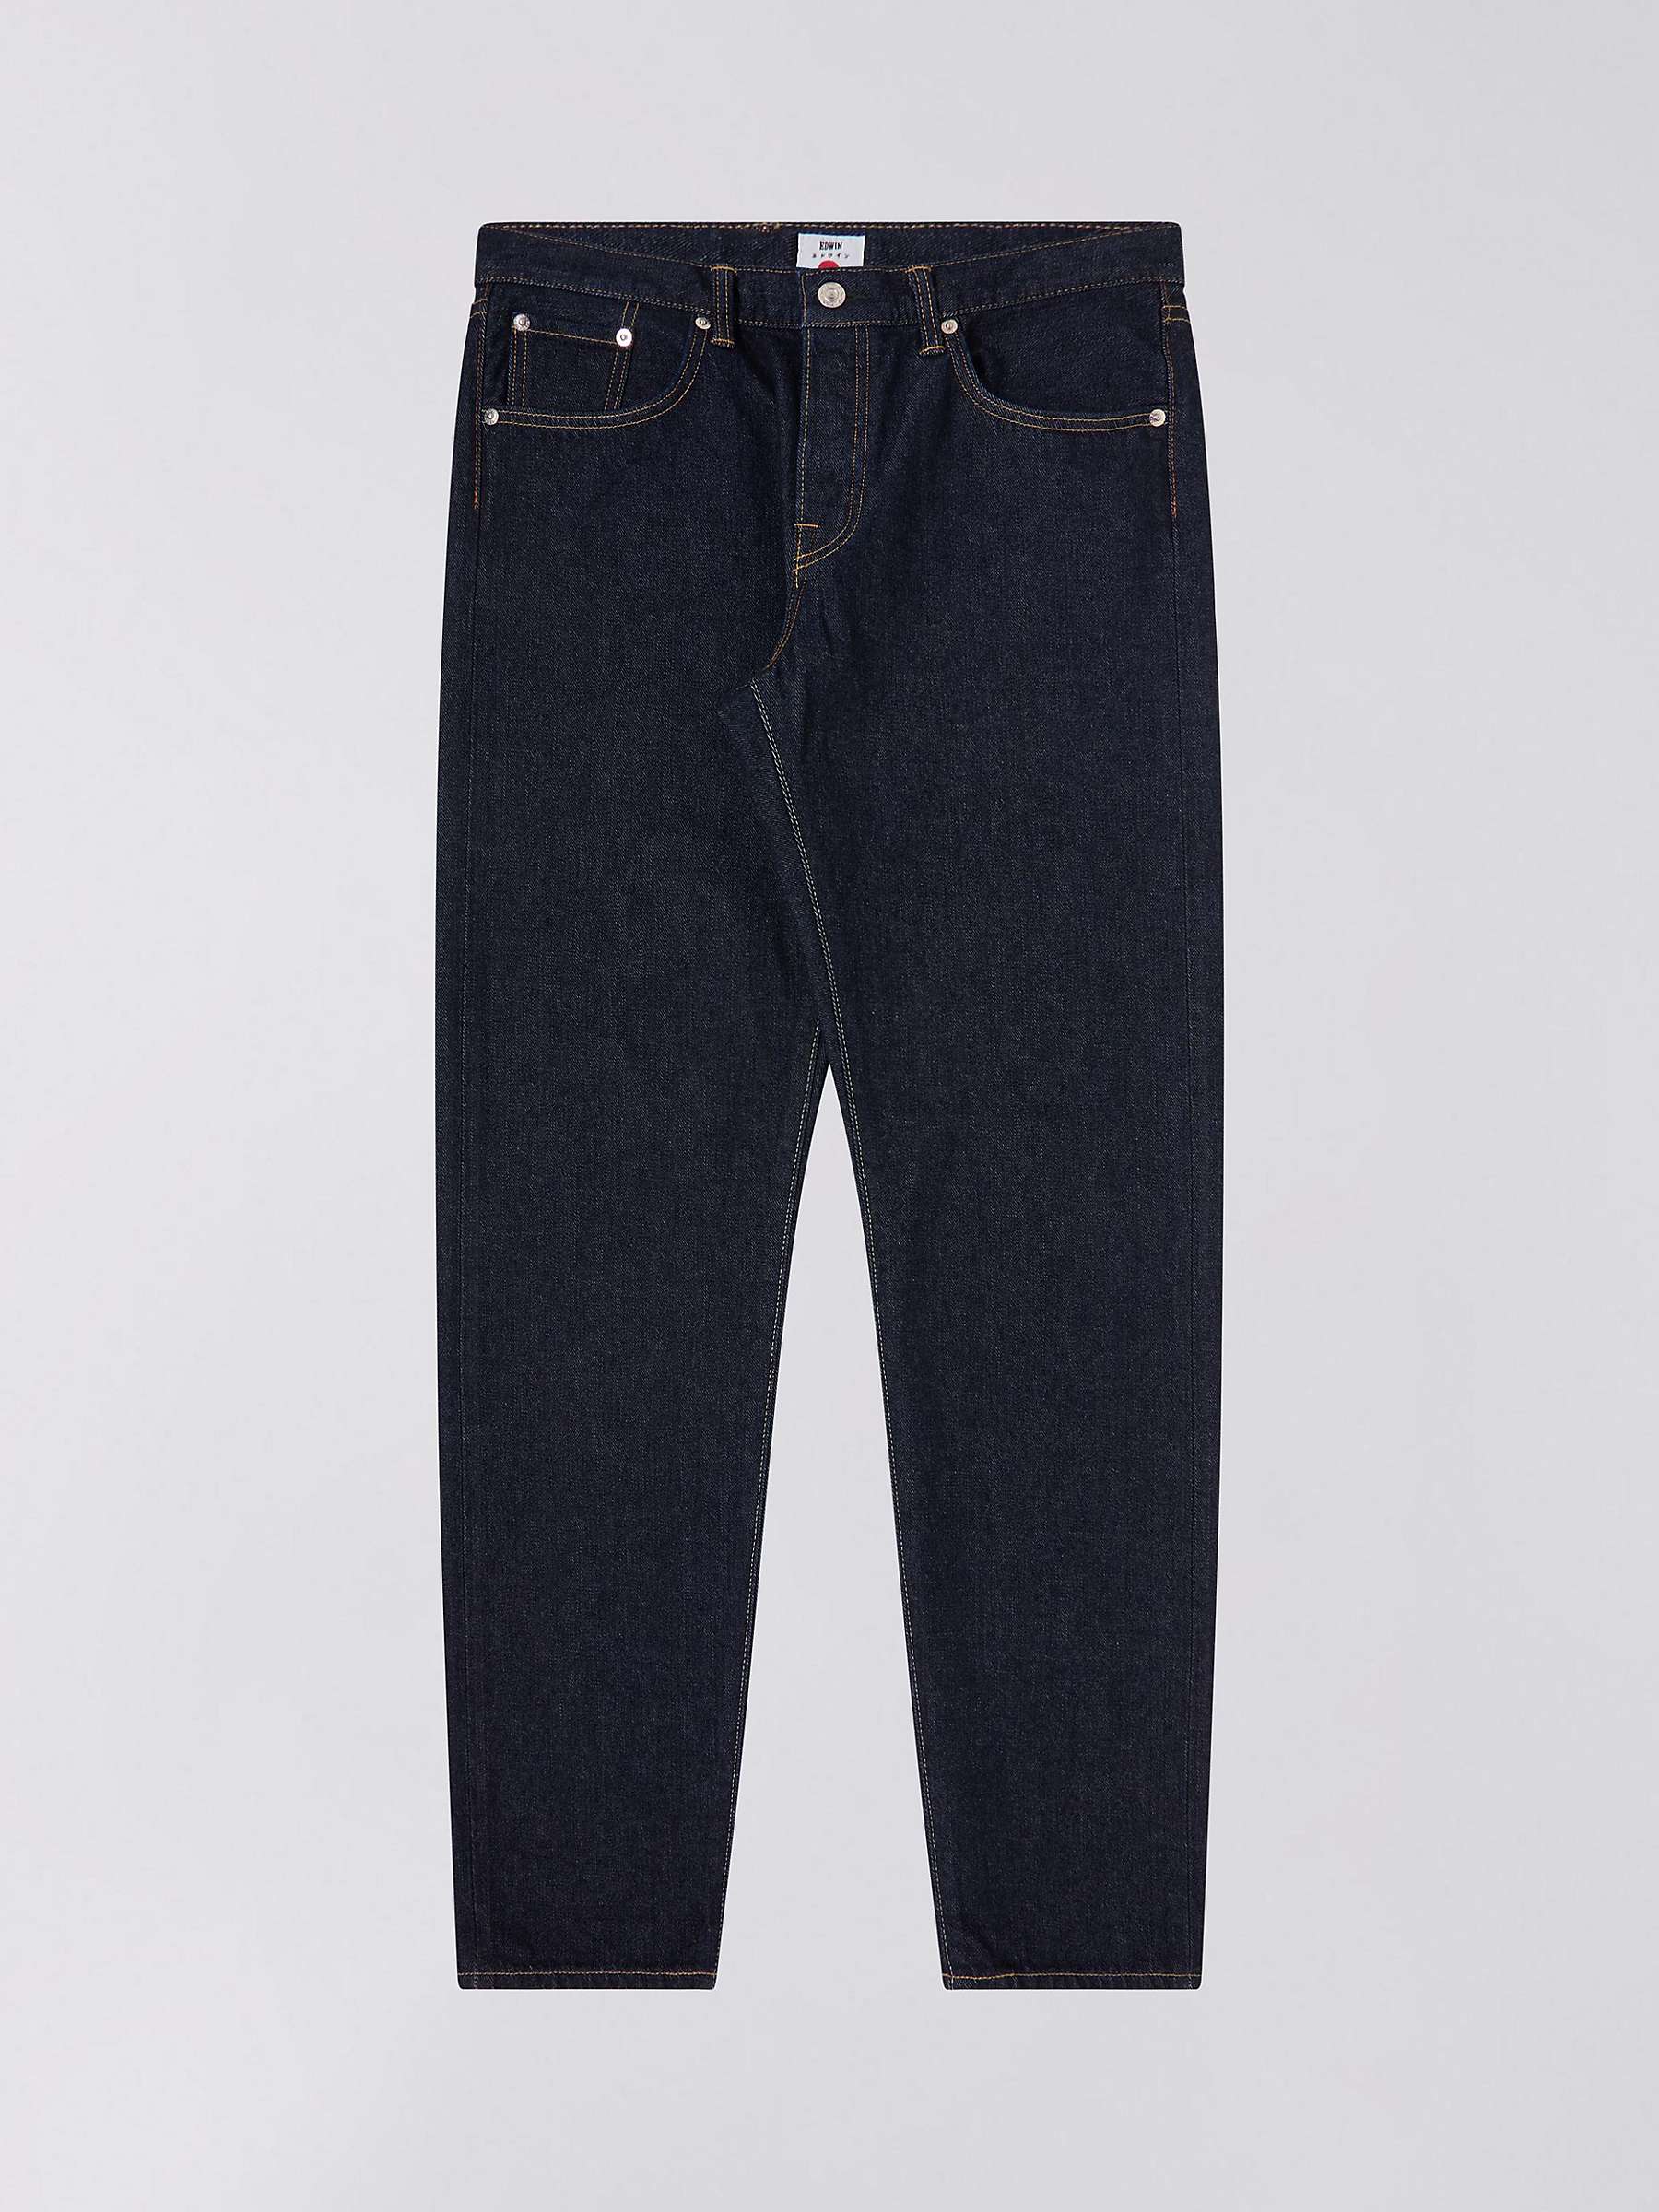 Buy Edwin Tapered Leg Jeans, Blue Online at johnlewis.com